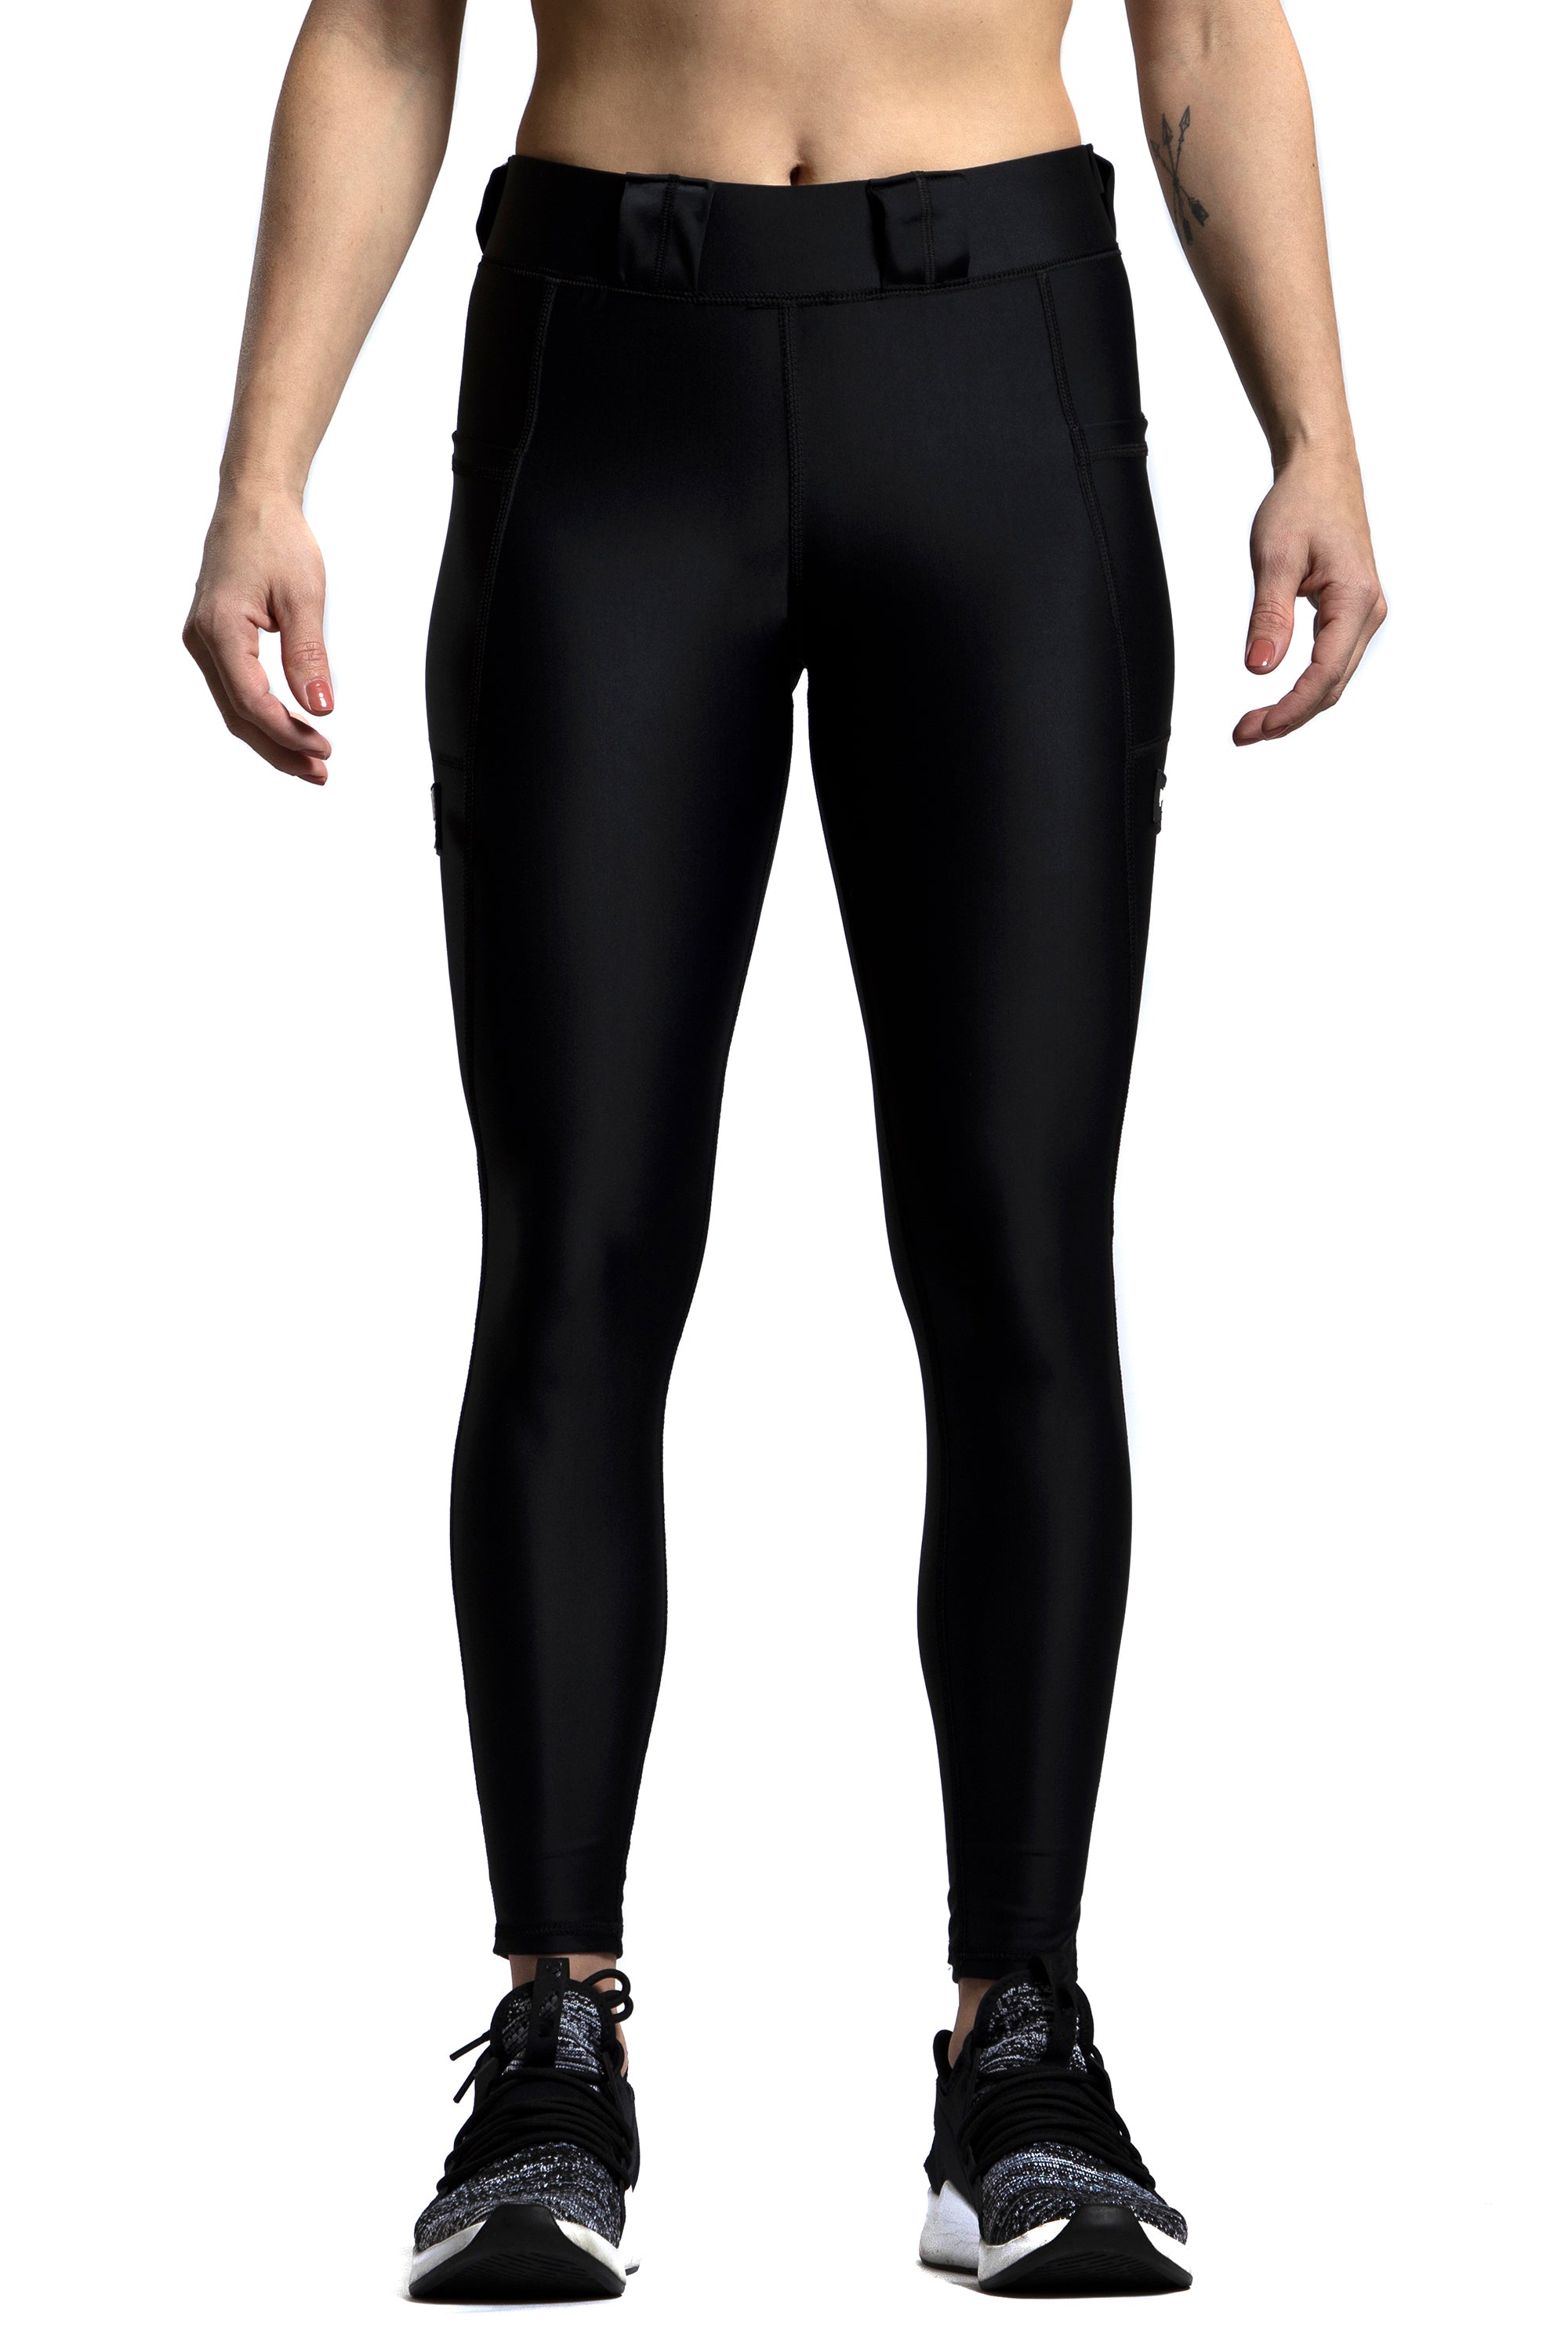 TRYBE Tactical Front/Rear Concealed Carry Legging - Womens, Black, XS,  PFFRCCWL-XS at  Women's Clothing store